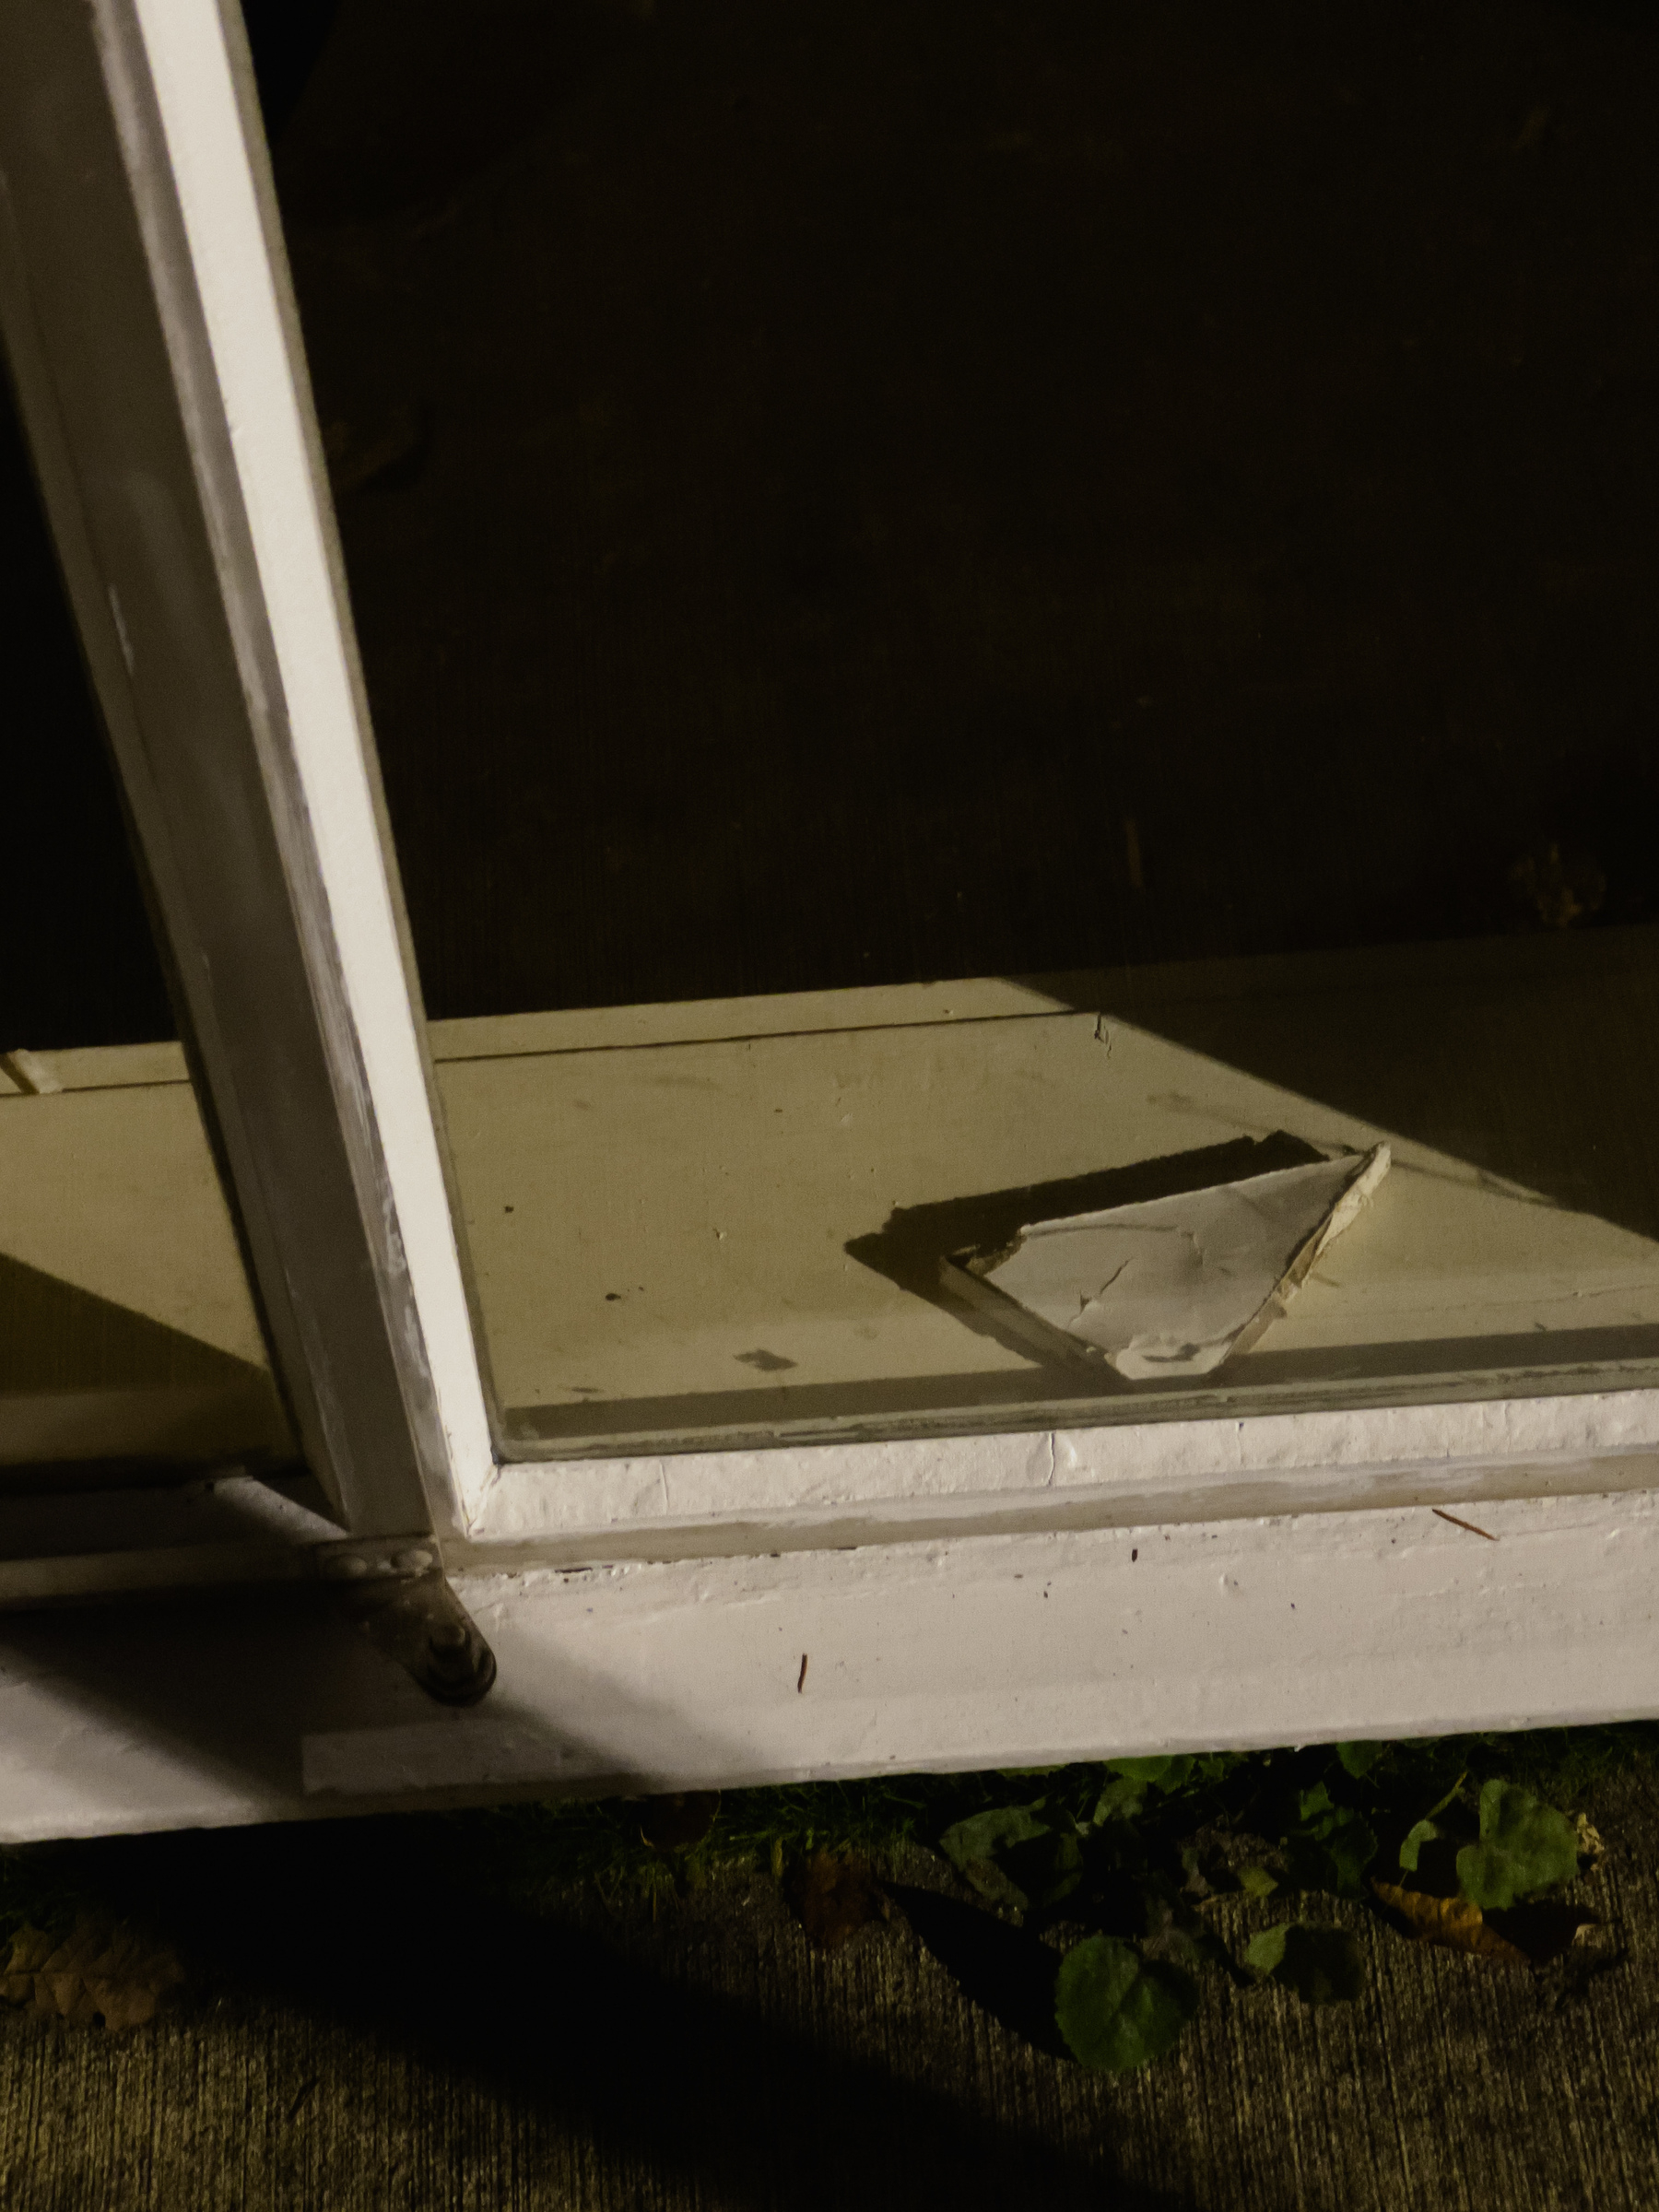 Piece of thick broken glass on interior window sill at night illuminated by security lights outside.